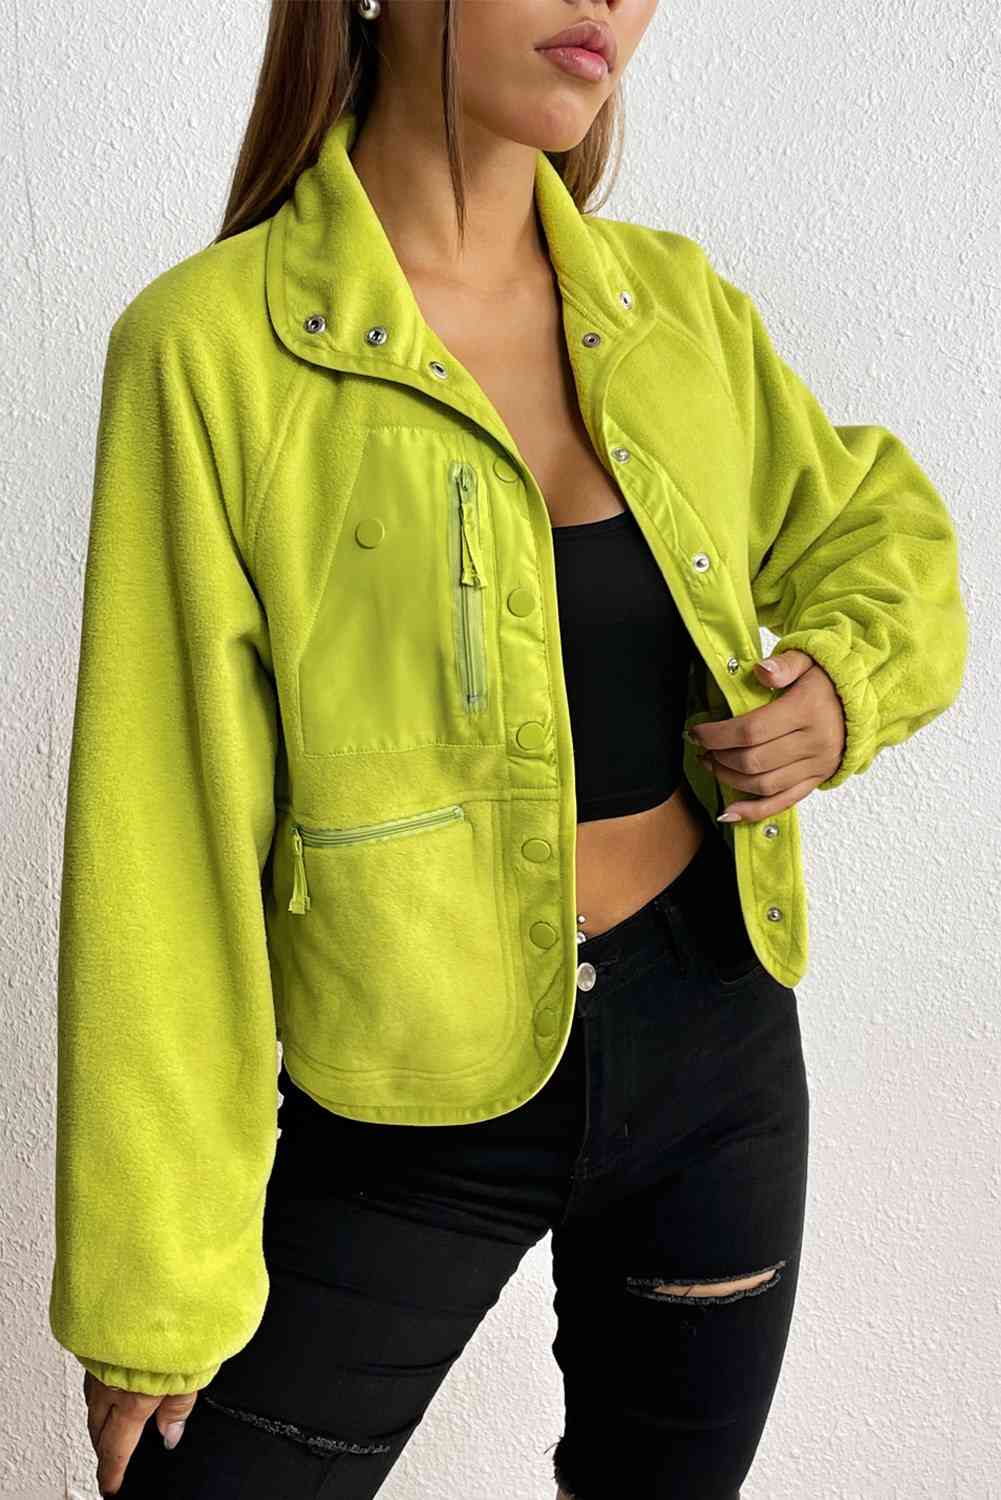 Snap Down Collared Jacket - Women’s Clothing & Accessories - Coats & Jackets - 3 - 2024